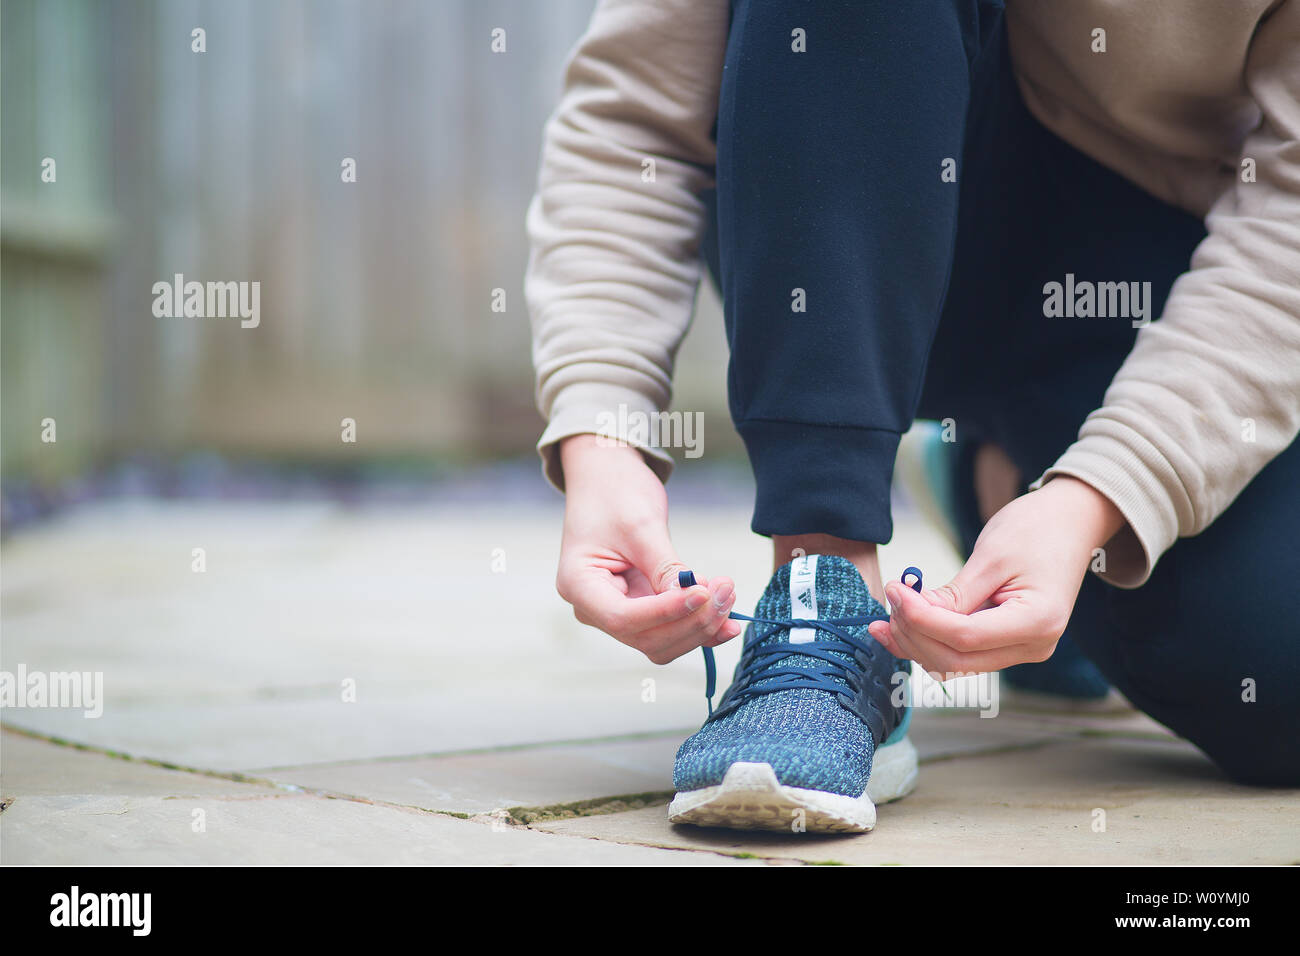 A man kneeling and tying his shoe laces Stock Photo